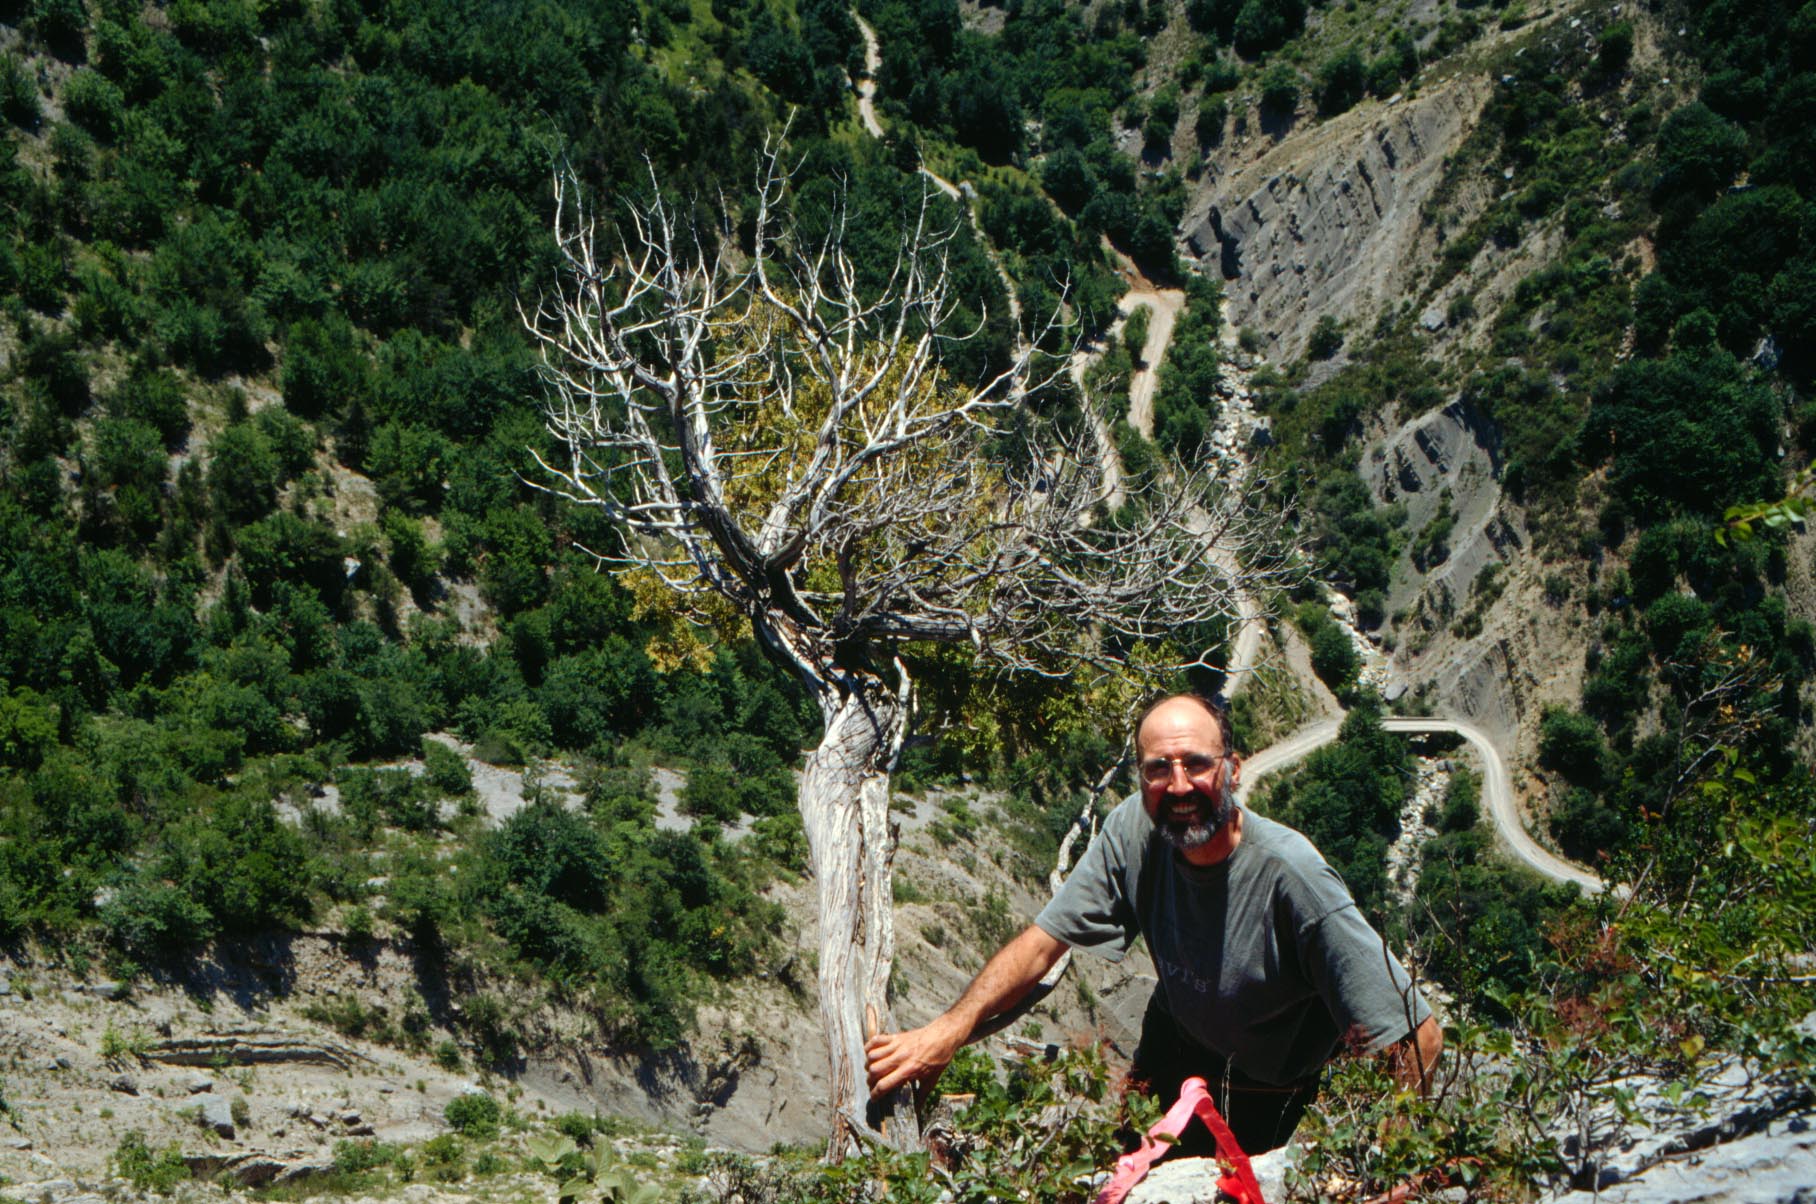 An older man with a beard and glasses hangs from a harness off a cliff, holding onto a tree growing sideways out of the rock.